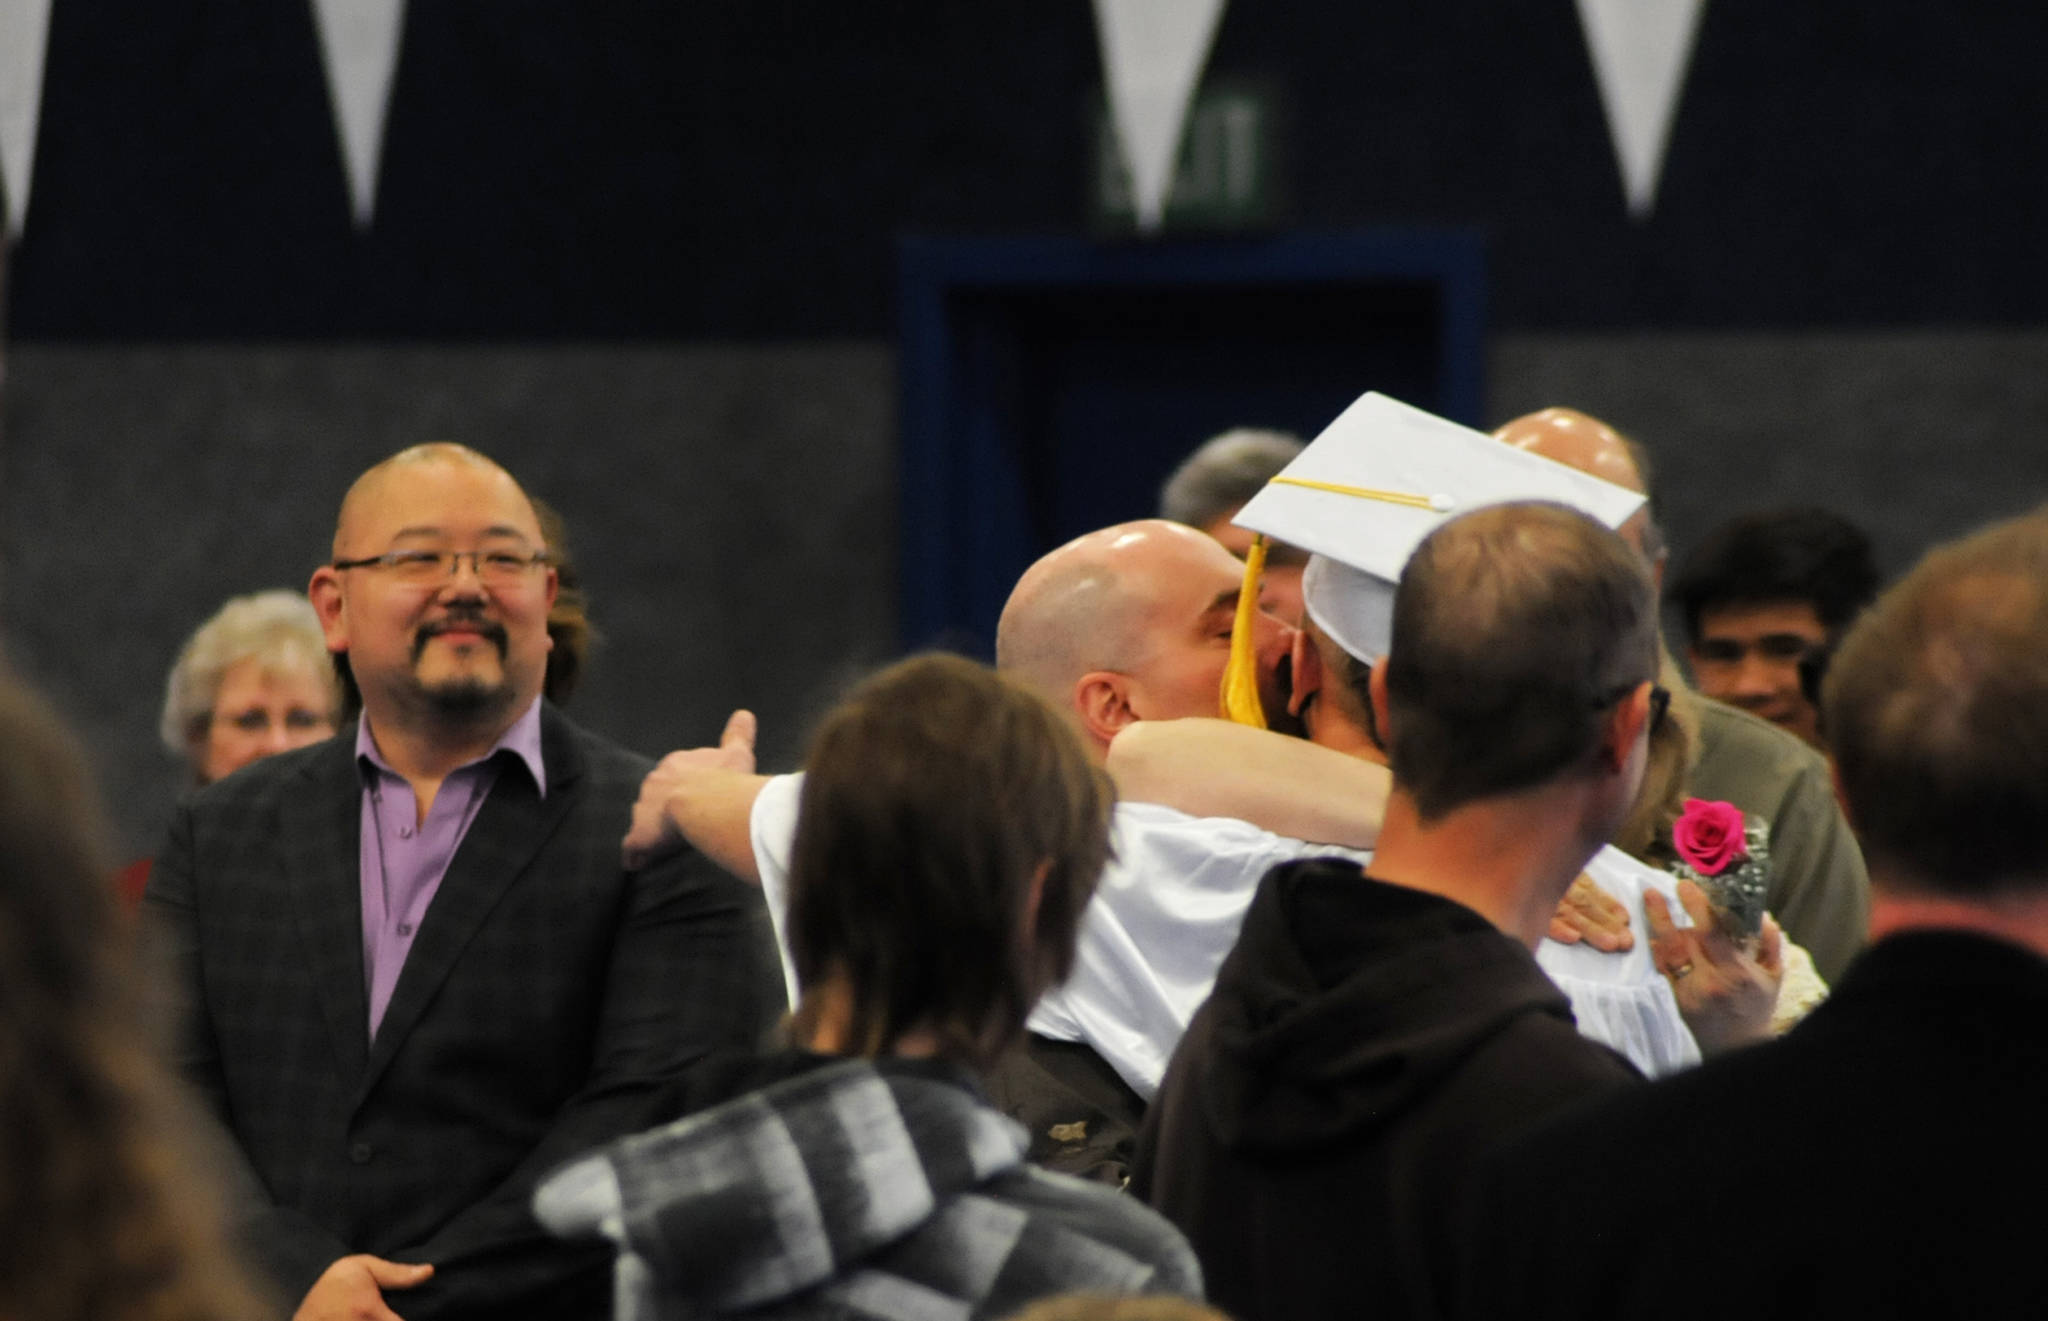 Cook Inlet Academy graduate Dalton Warren embraces his parents as he processed into the school’s graduation ceremony Sunday, May 7, 2017 in Soldotna, Alaska. (Elizabeth Earl/Peninsula Clarion)  Cook Inlet Academy graduate Dalton Warren embraces his parents as he processed into the school’s graduation ceremony Sunday in Soldotna. (Elizabeth Earl/Peninsula Clarion)